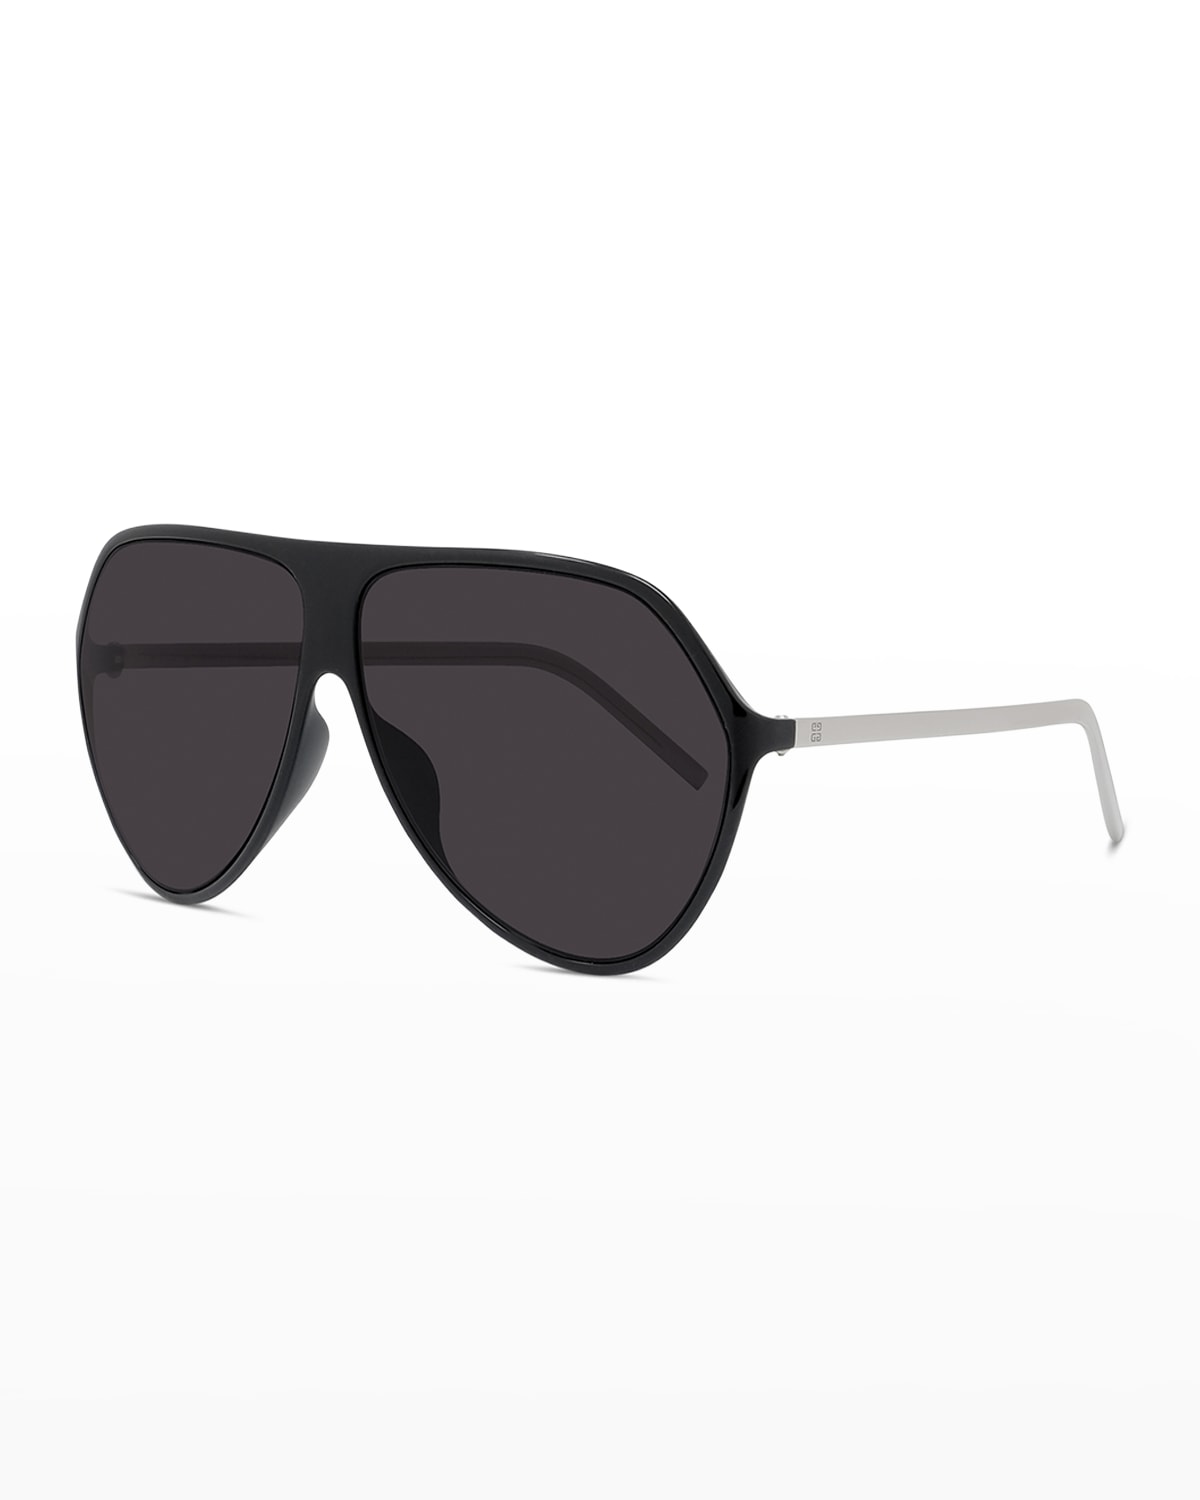 GIVENCHY MEN'S METAL 4G-LOGO OVAL SUNGLASSES